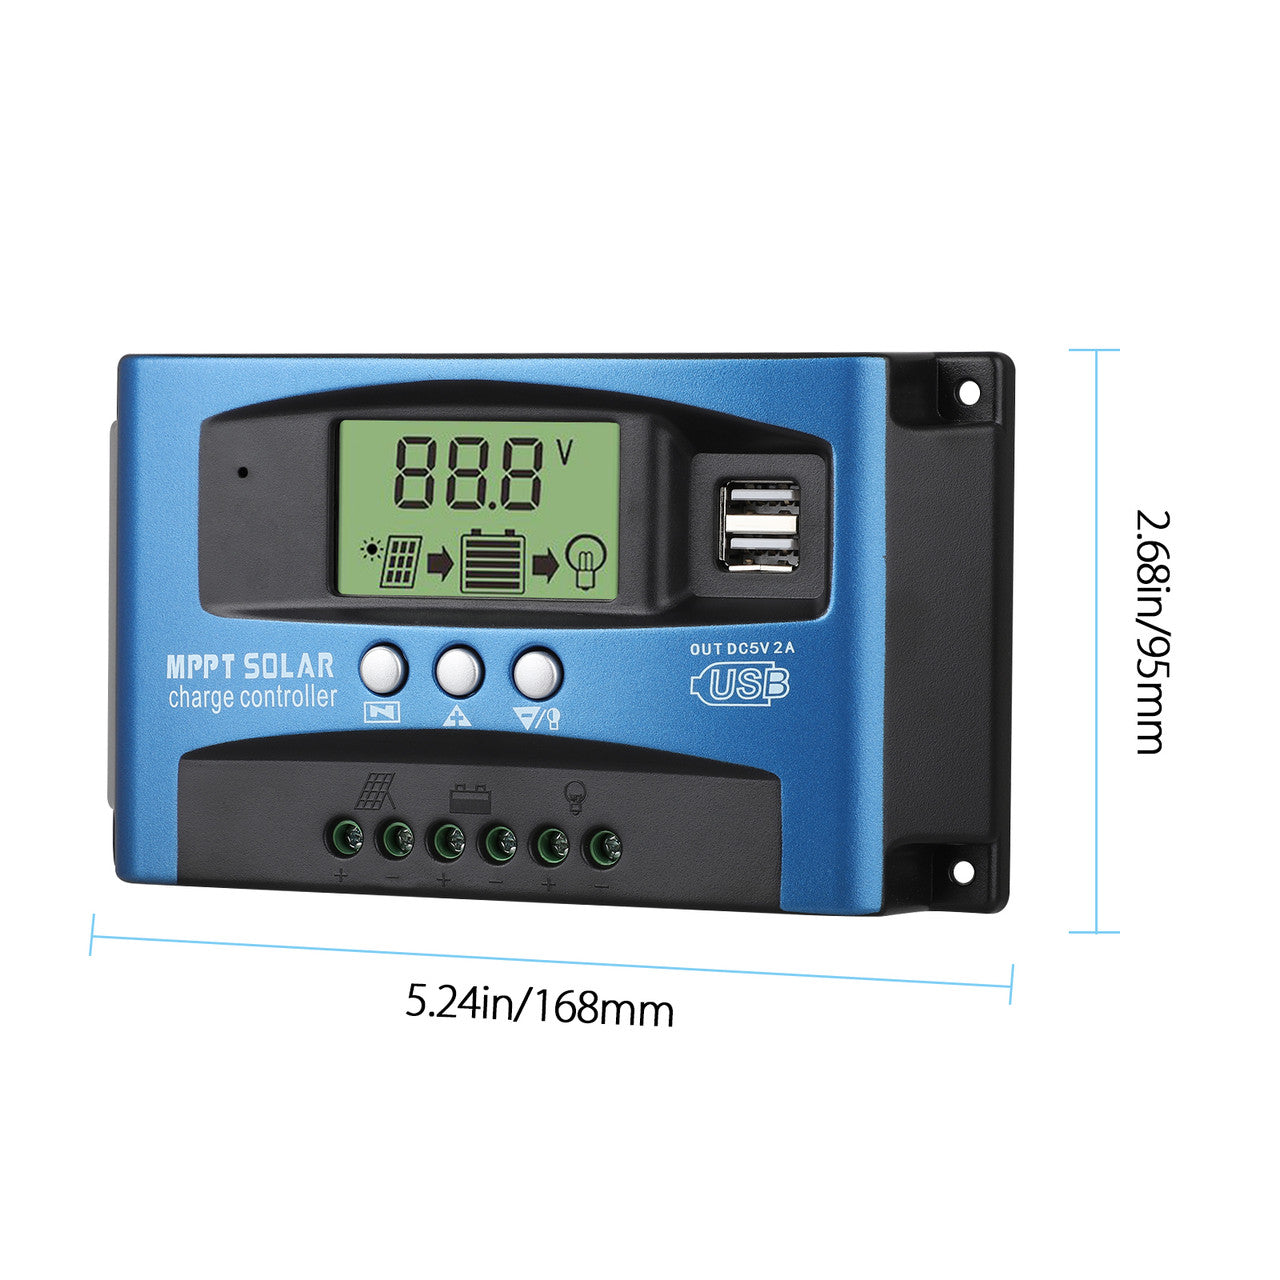 MPPT Solar Charge Controller 100A Solar Panel Controller,Automatic focusing MPPT tracking charging,Large-screen LCD display,SOC function,control charge current & supply power to the loads